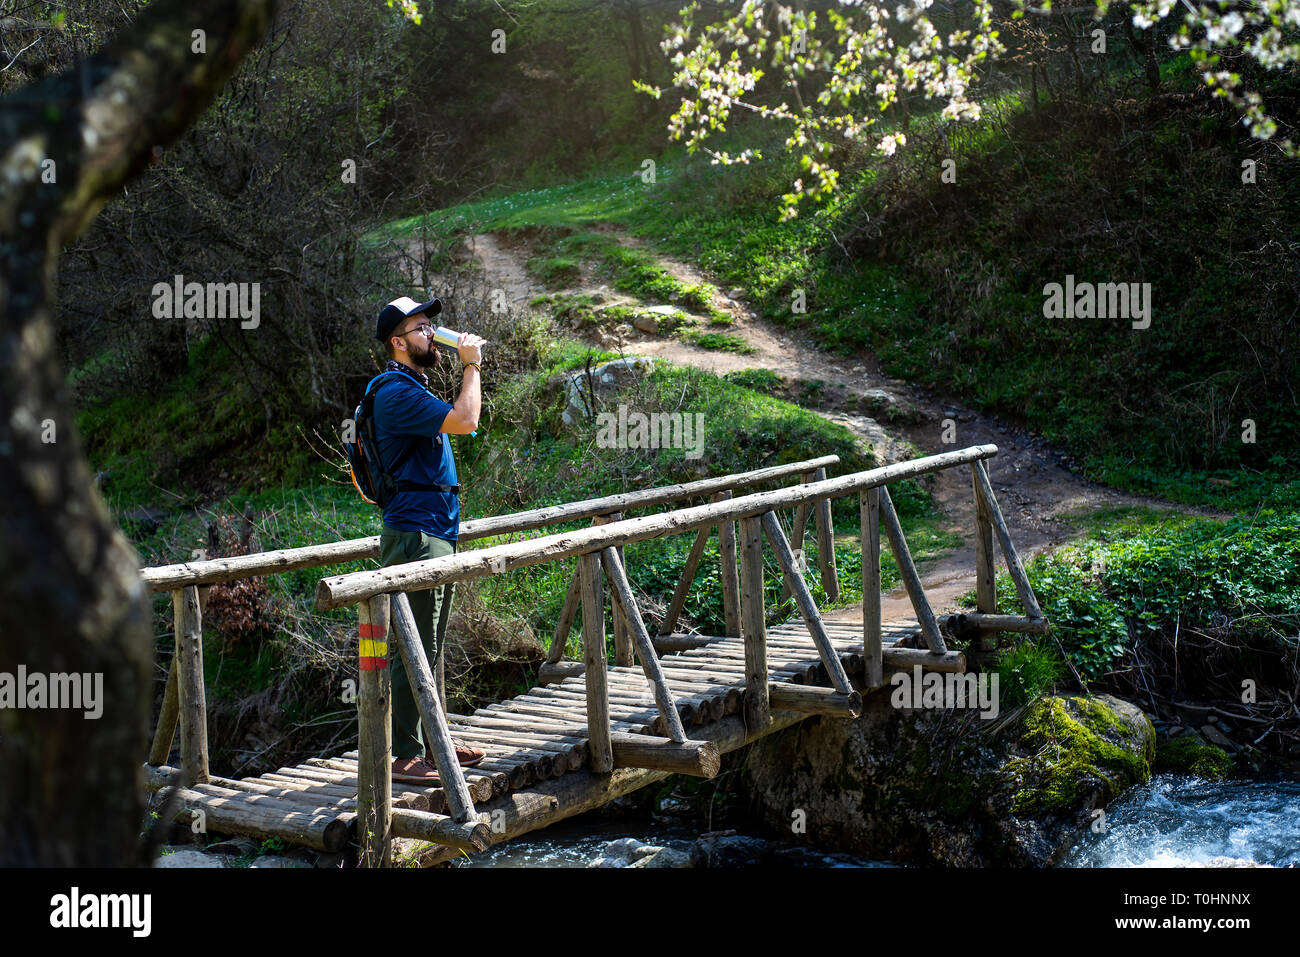 Man drinking water the wooden bridge over small river outdoors Stock Photo